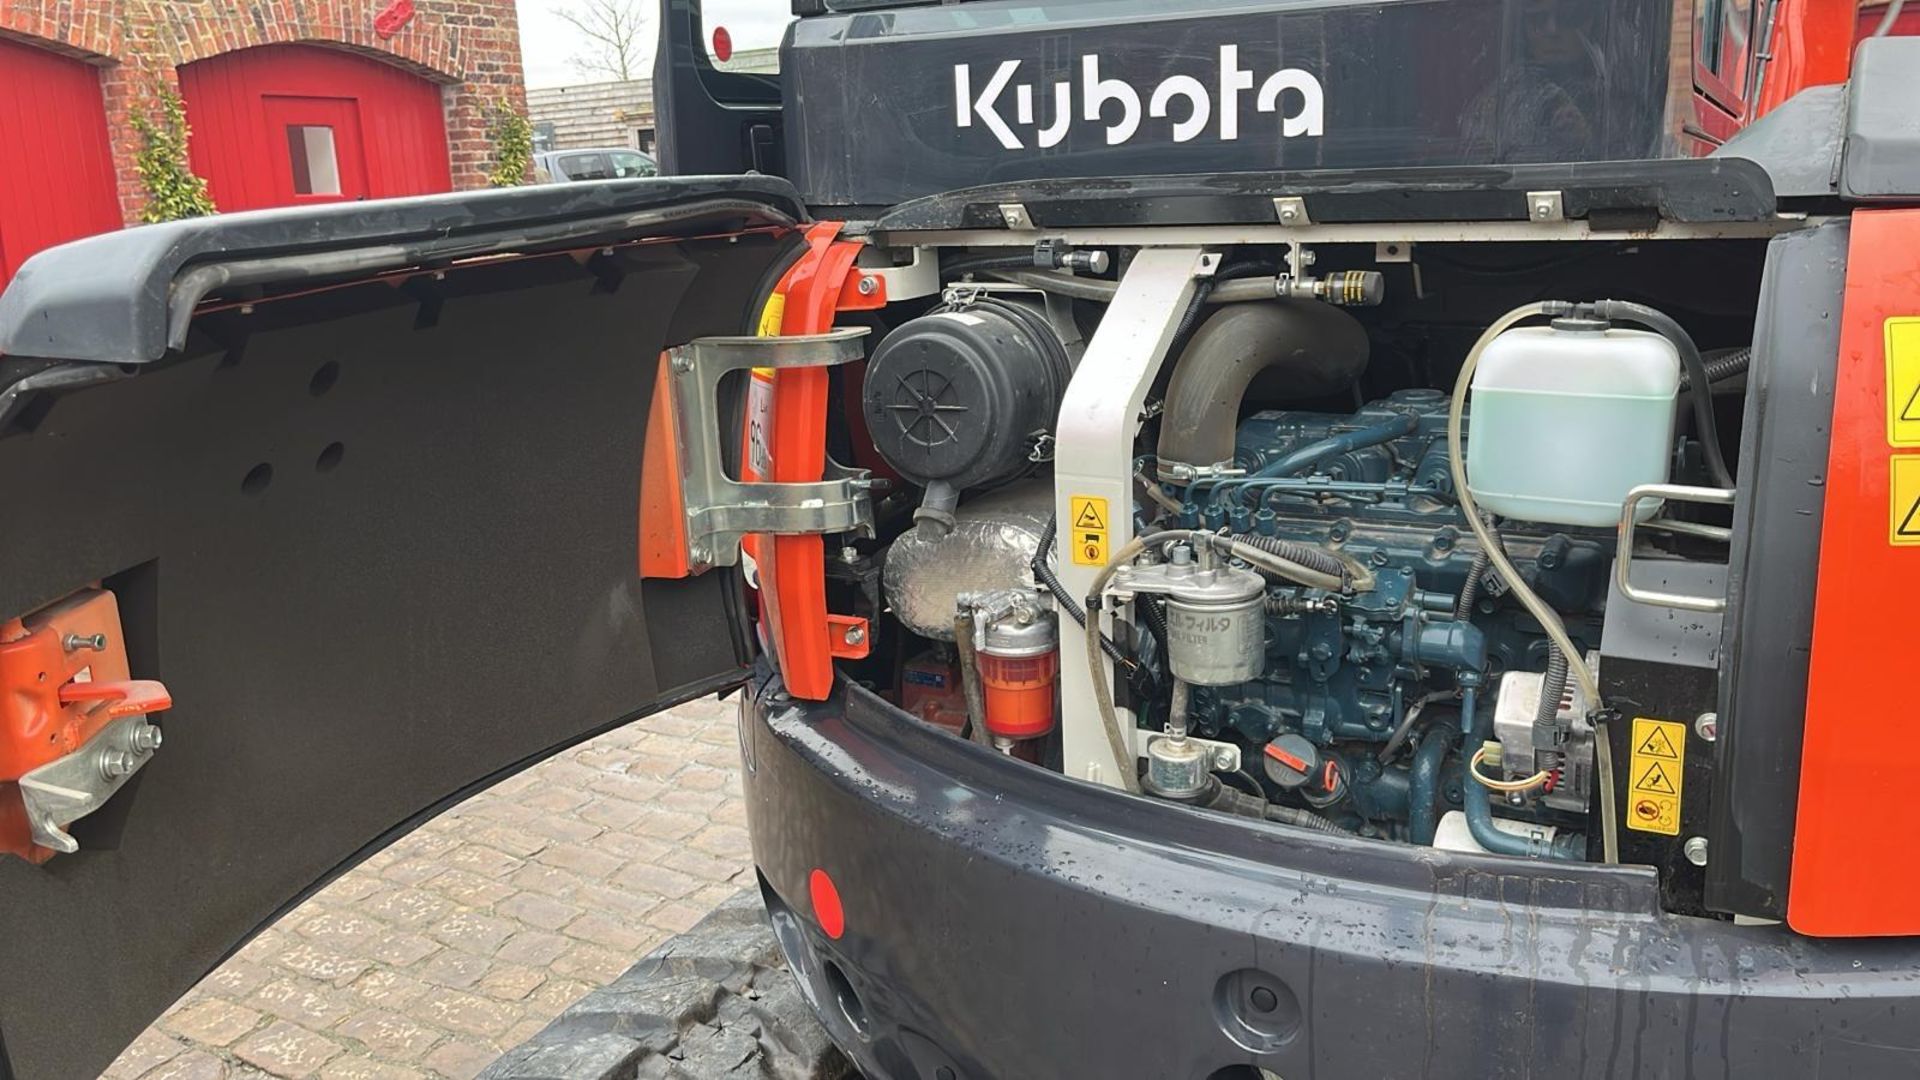 2019 KUBOTA U48-4 COMPACT EXCAVATOR 552 HOURS WITH HYDRAULIC QUICK HITCH TO BE SOLD WITH 4 BUCKETS - Image 18 of 24